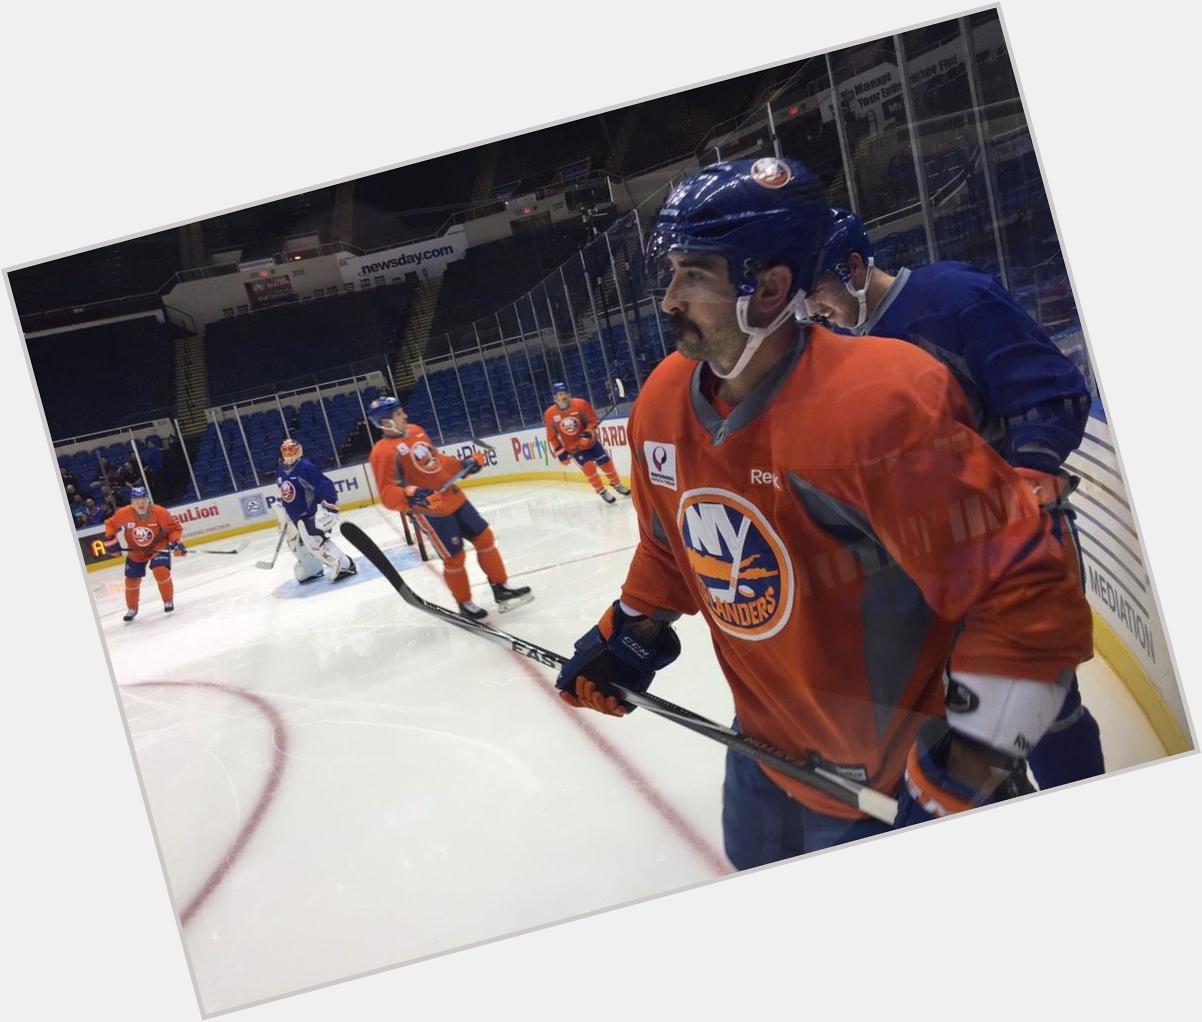 HAPPY BIRTHDAY! The birthday boy, Cal Clutterbuck, is on the ice for todays morning skate. 